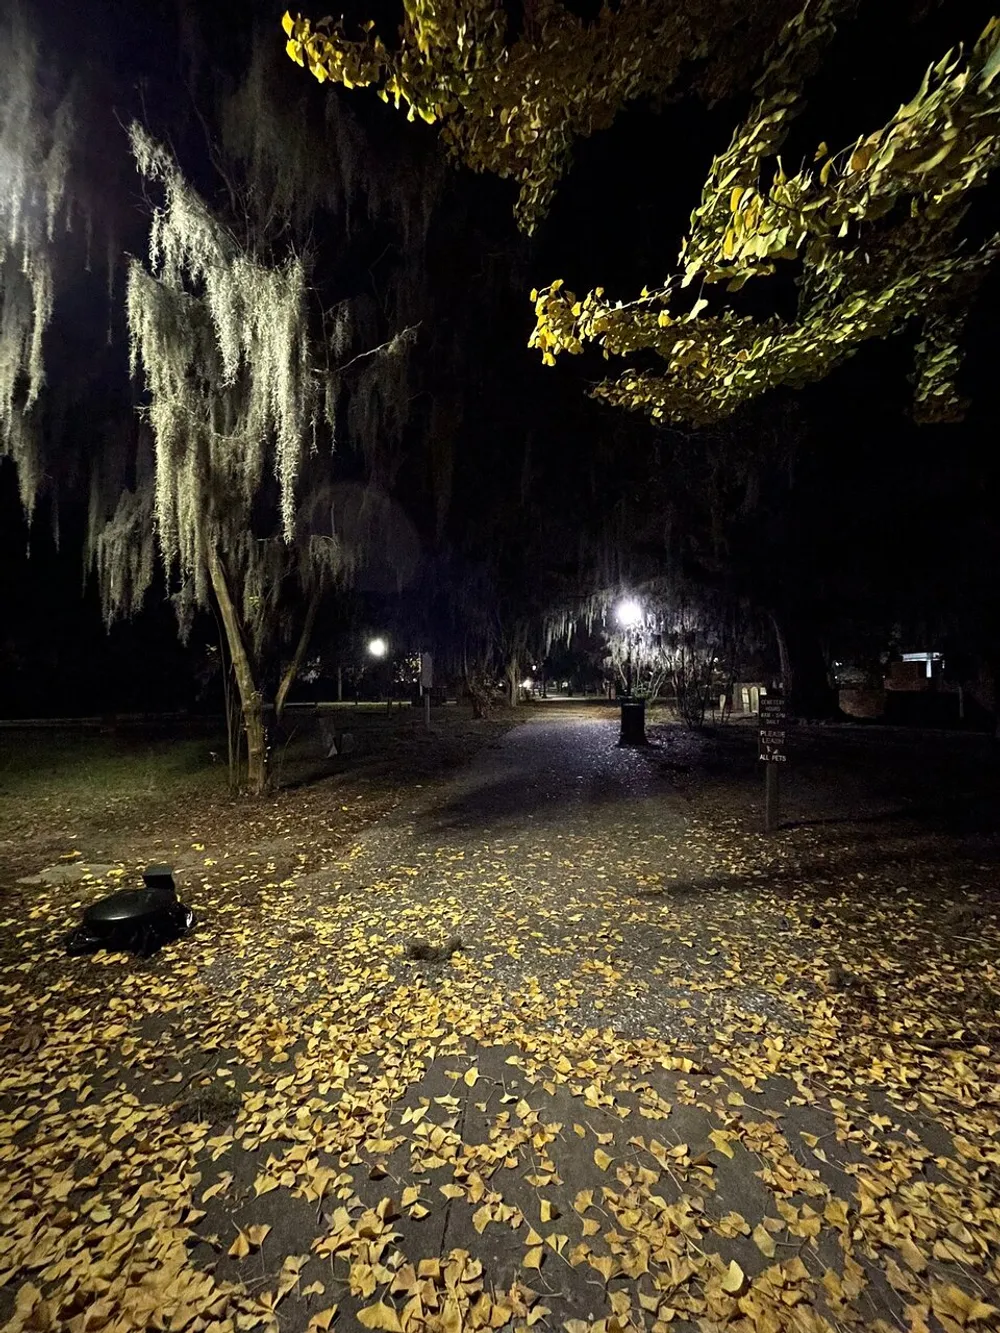 The image captures a night scene of a park with a path covered in fallen leaves illuminated by artificial light and flanked by trees draped in Spanish moss